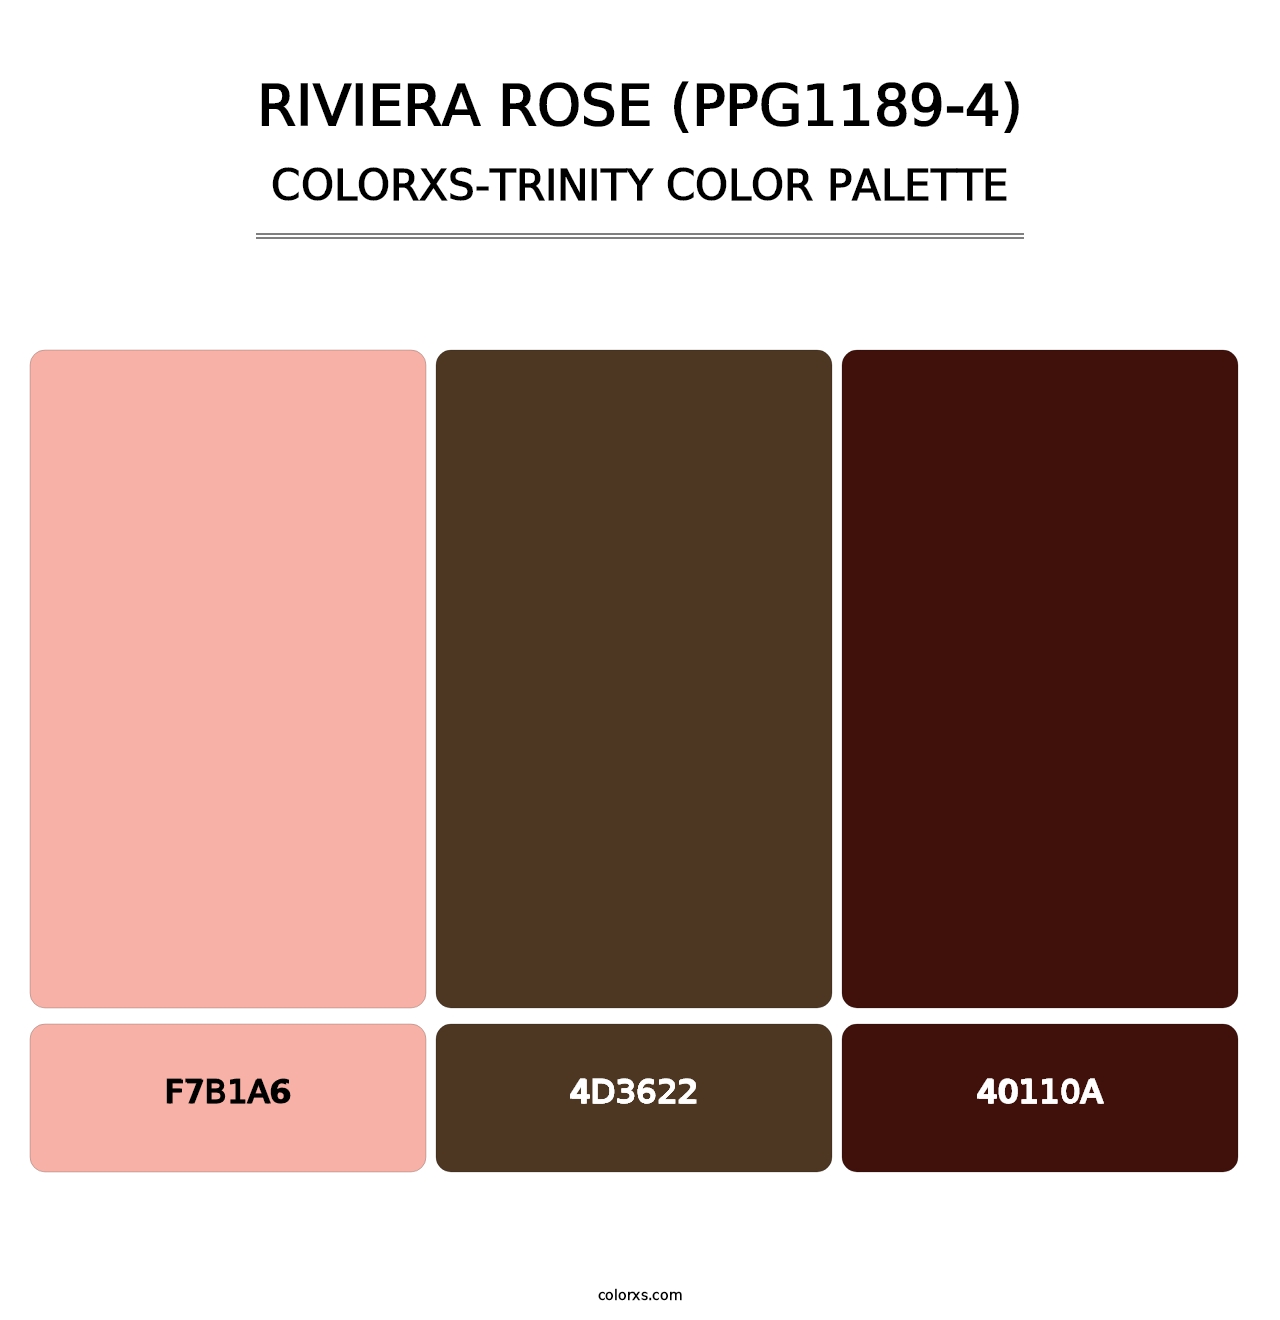 Riviera Rose (PPG1189-4) - Colorxs Trinity Palette